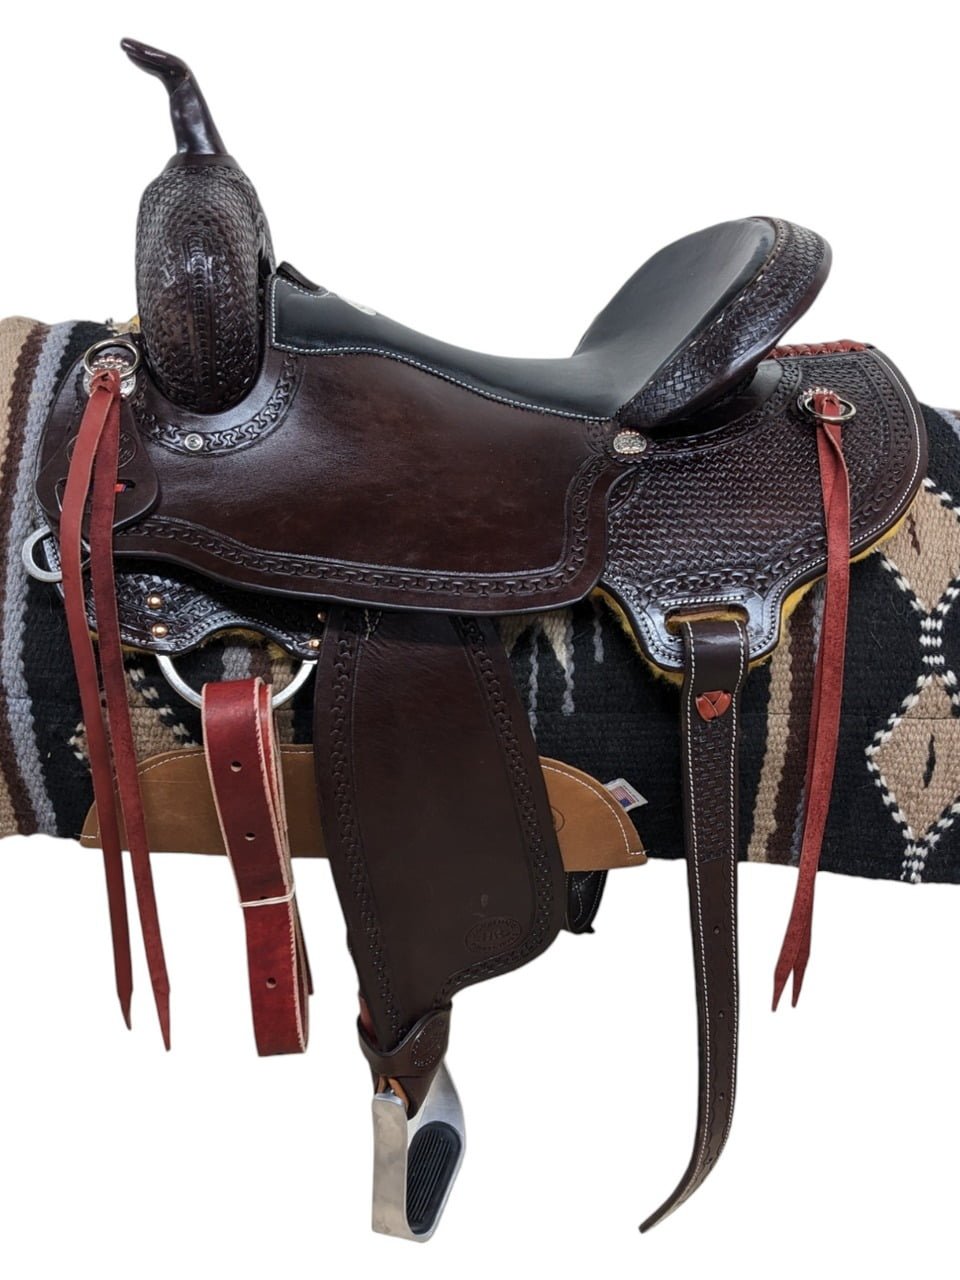 Saddle Features From Clydesdales to Belgians, this HR Saddlery draft trail saddle will work perfect for any of your heavy horse breeds! Dark chocolate leather Padded black seat Mother hubbard, cut-out back skirt In-skirt rigging Latigo leather saddle strings Basket stamp and carlos border tooling Metal stirrups and rubber grippers Includes a rear cinch Smooth leather Saddle Specifications Cantle Height: 4" Skirt Length: Approx. 26-27" (Ranges depending on seat size) Horn Height: 3.5" Weight: Approx. 30 lbs Gullet: 8"